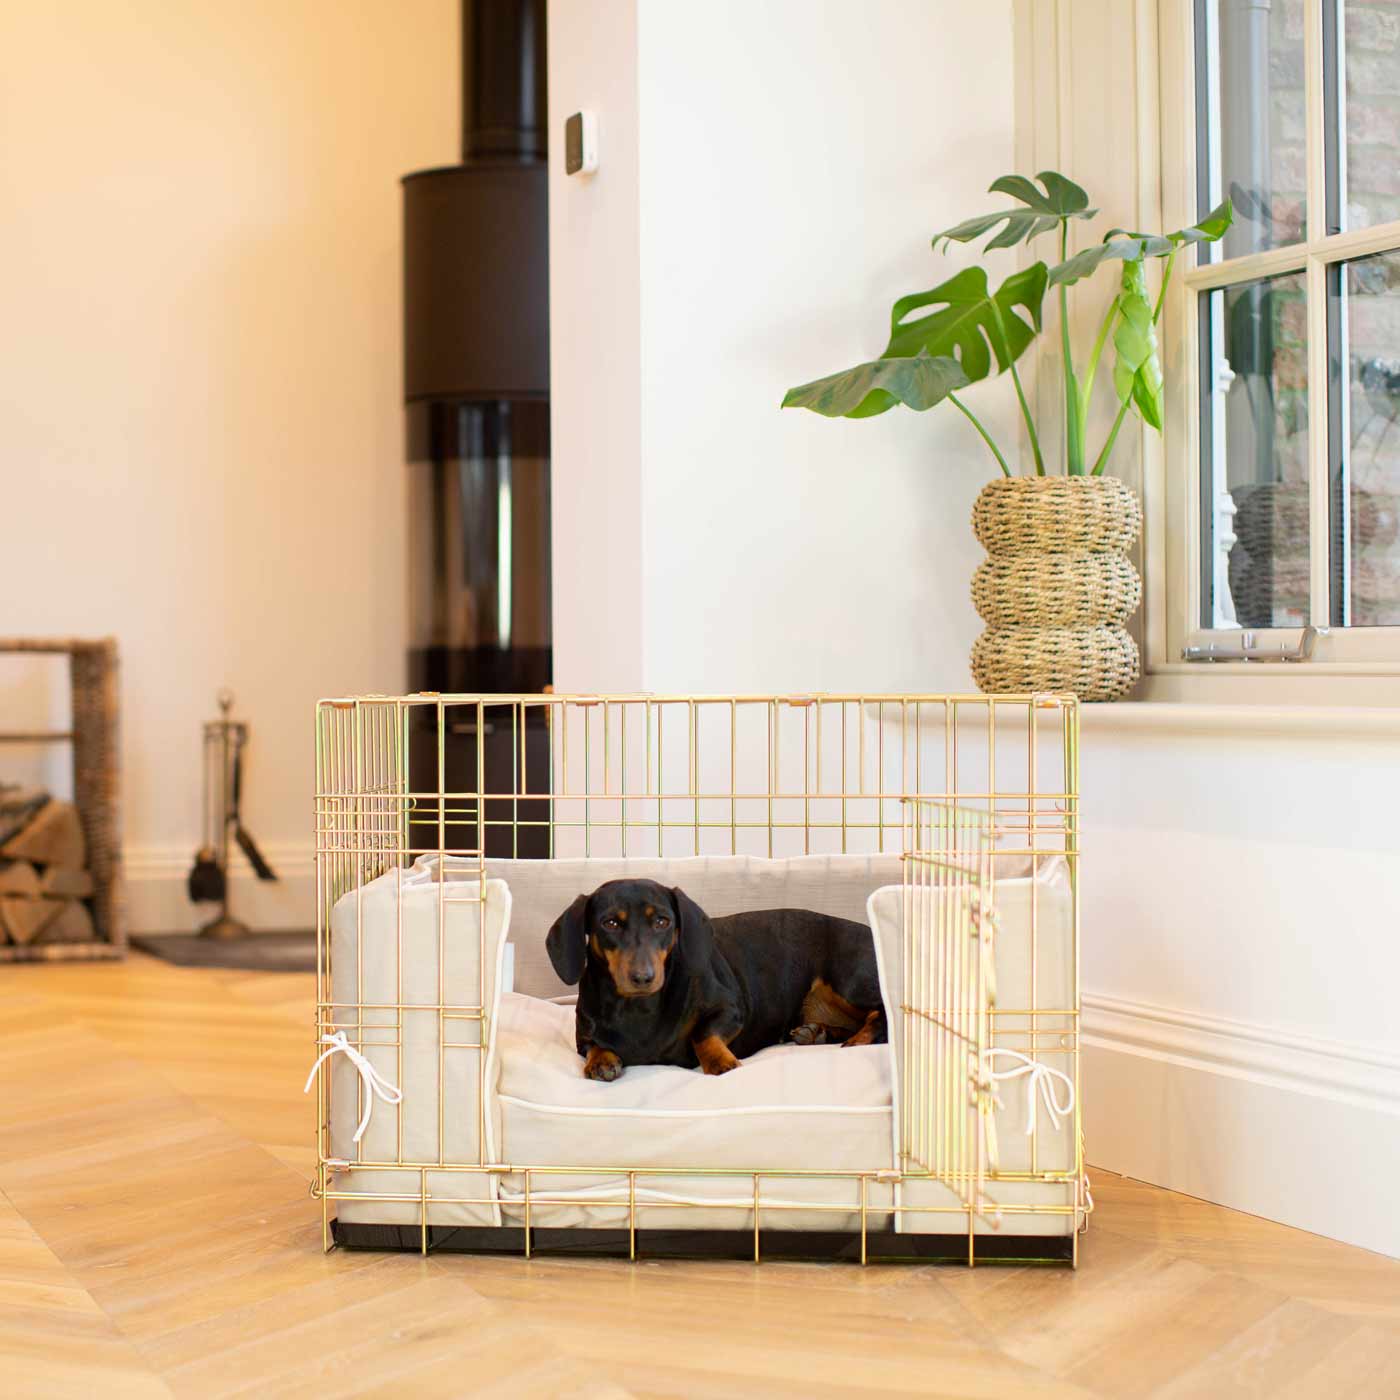 Discover Our Heavy-Duty Dog Crate With Savanna Oatmeal Cushion & Bumper! The Perfect Crate Accessories. Available To Personalise Here at Lords & Labradors 